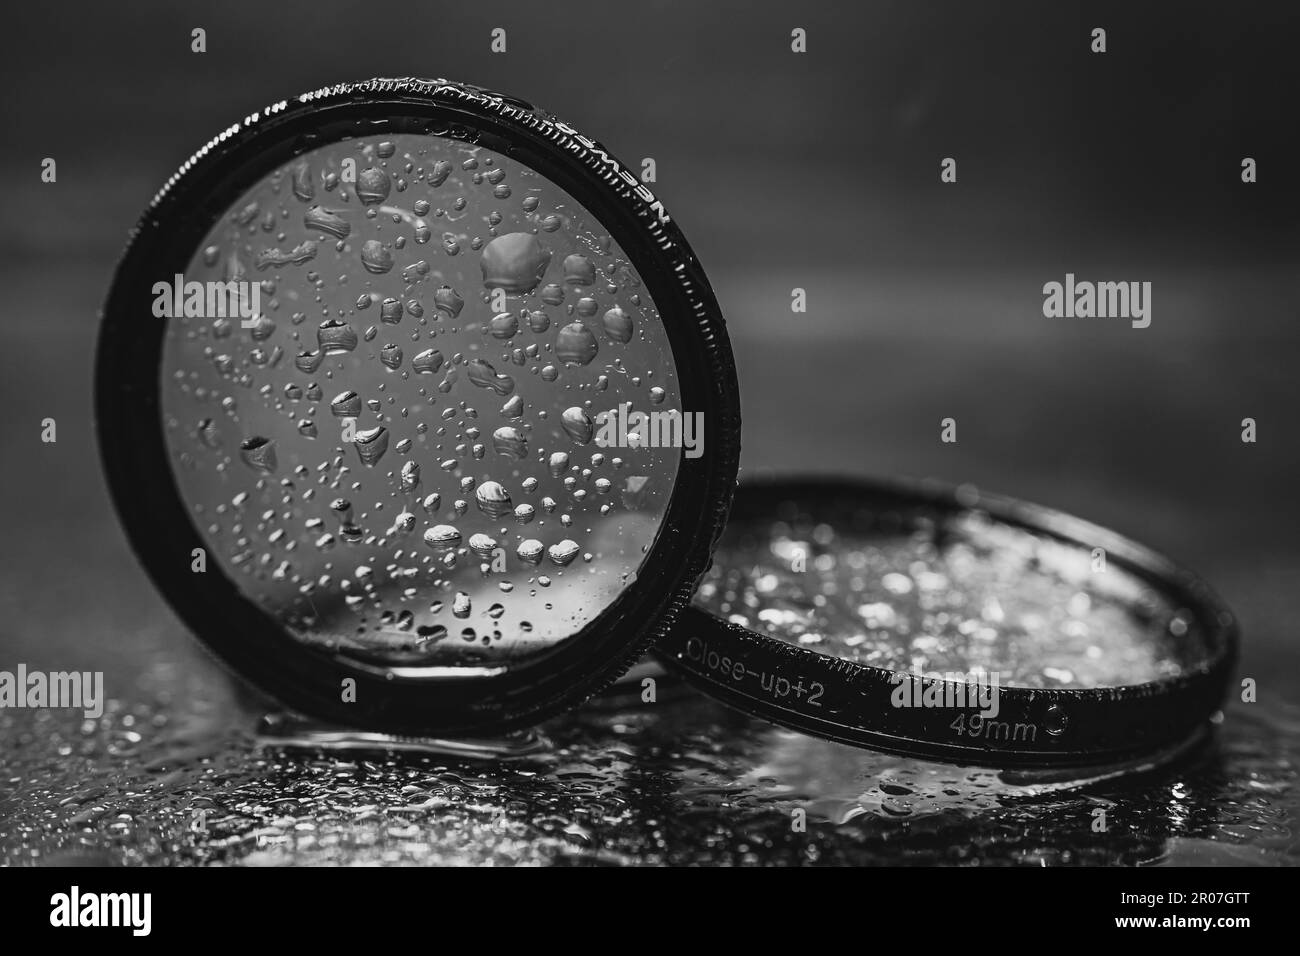 Two way mirror Black and White Stock Photos & Images - Alamy